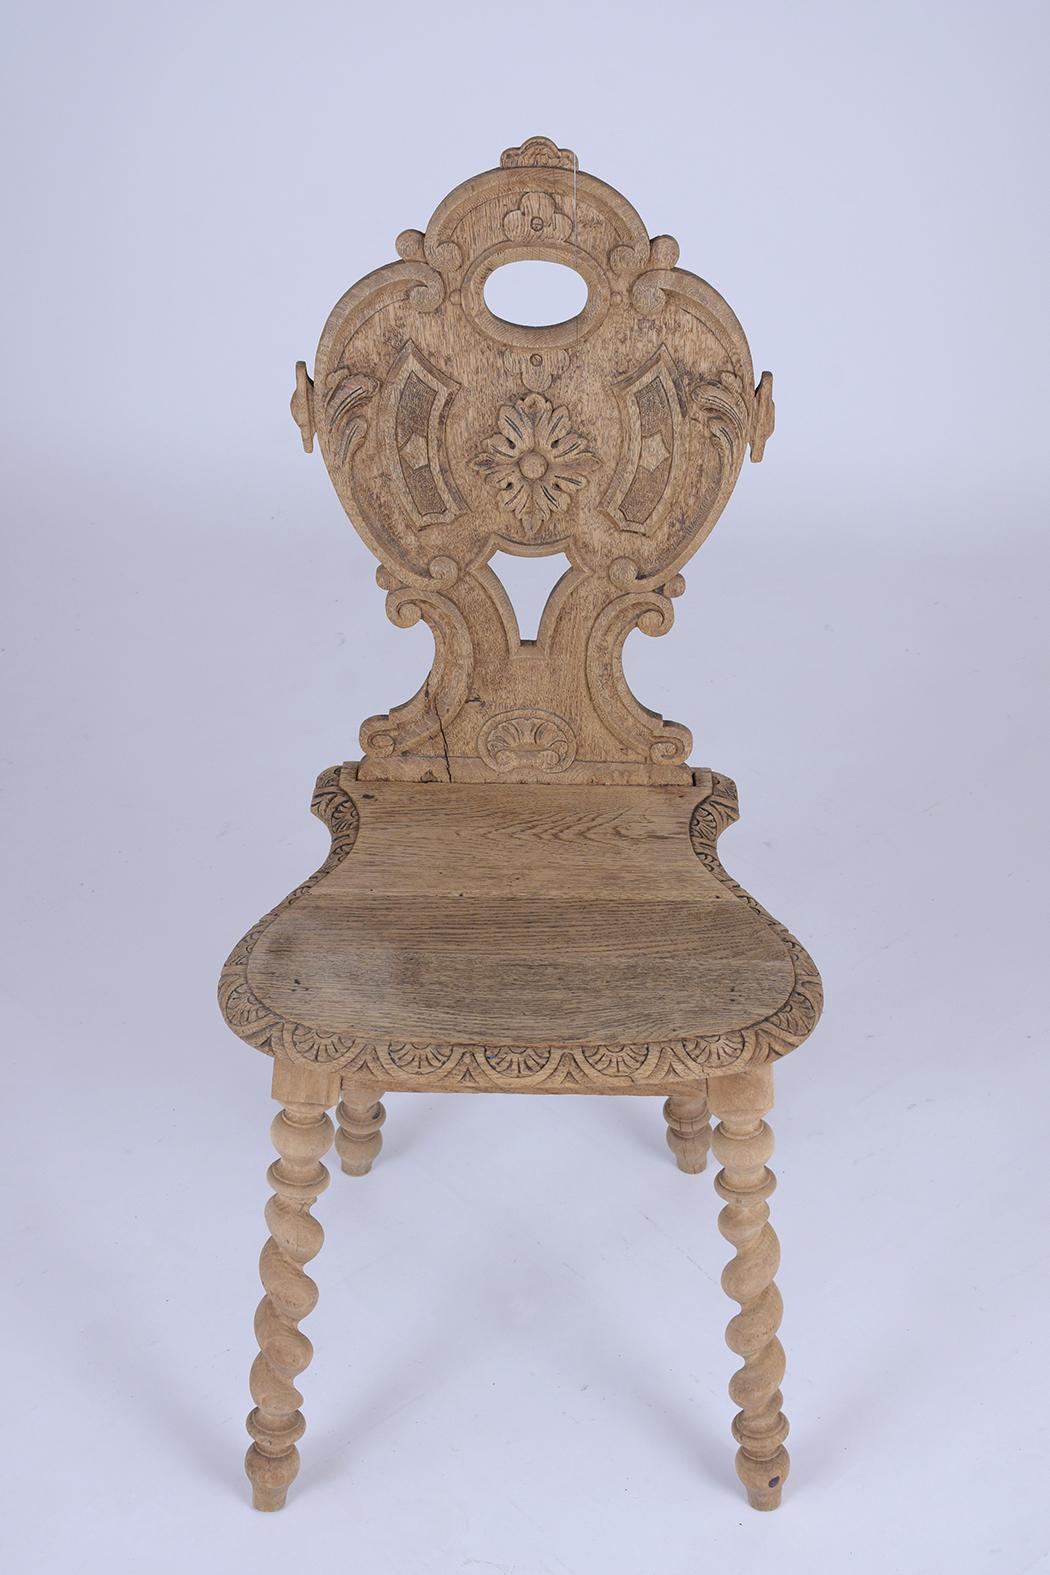 Set of Four 19th-Century Baroque Oakwood Side Chairs - Refined Craftsmanship